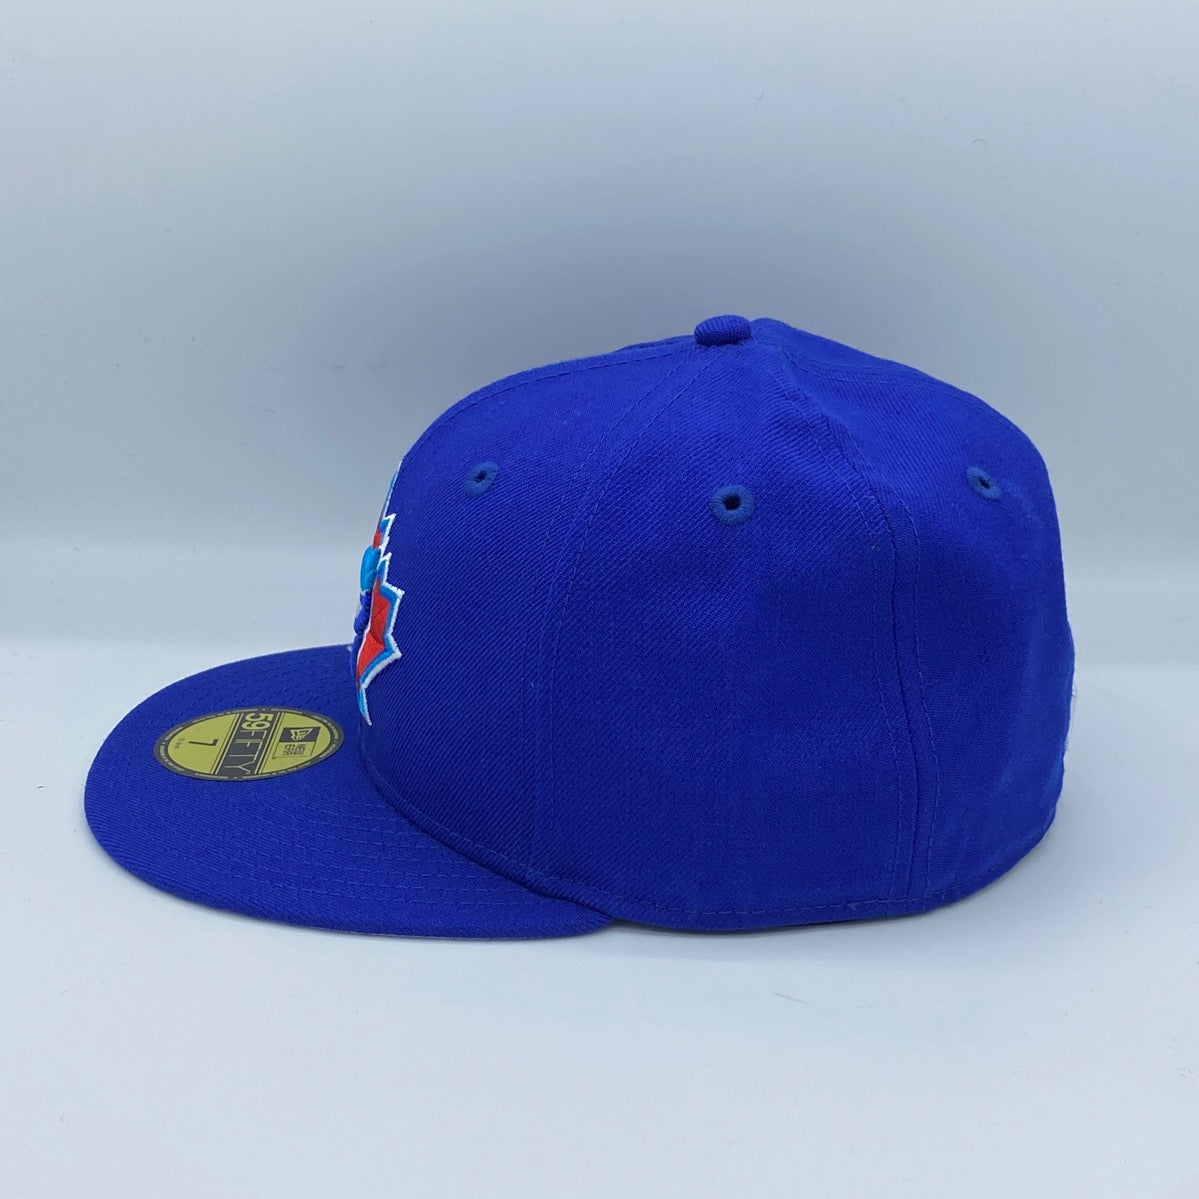 Toronto Baseball Hat Light Royal Blue 2001 Cooperstown AC New Era 59FIFTY Fitted